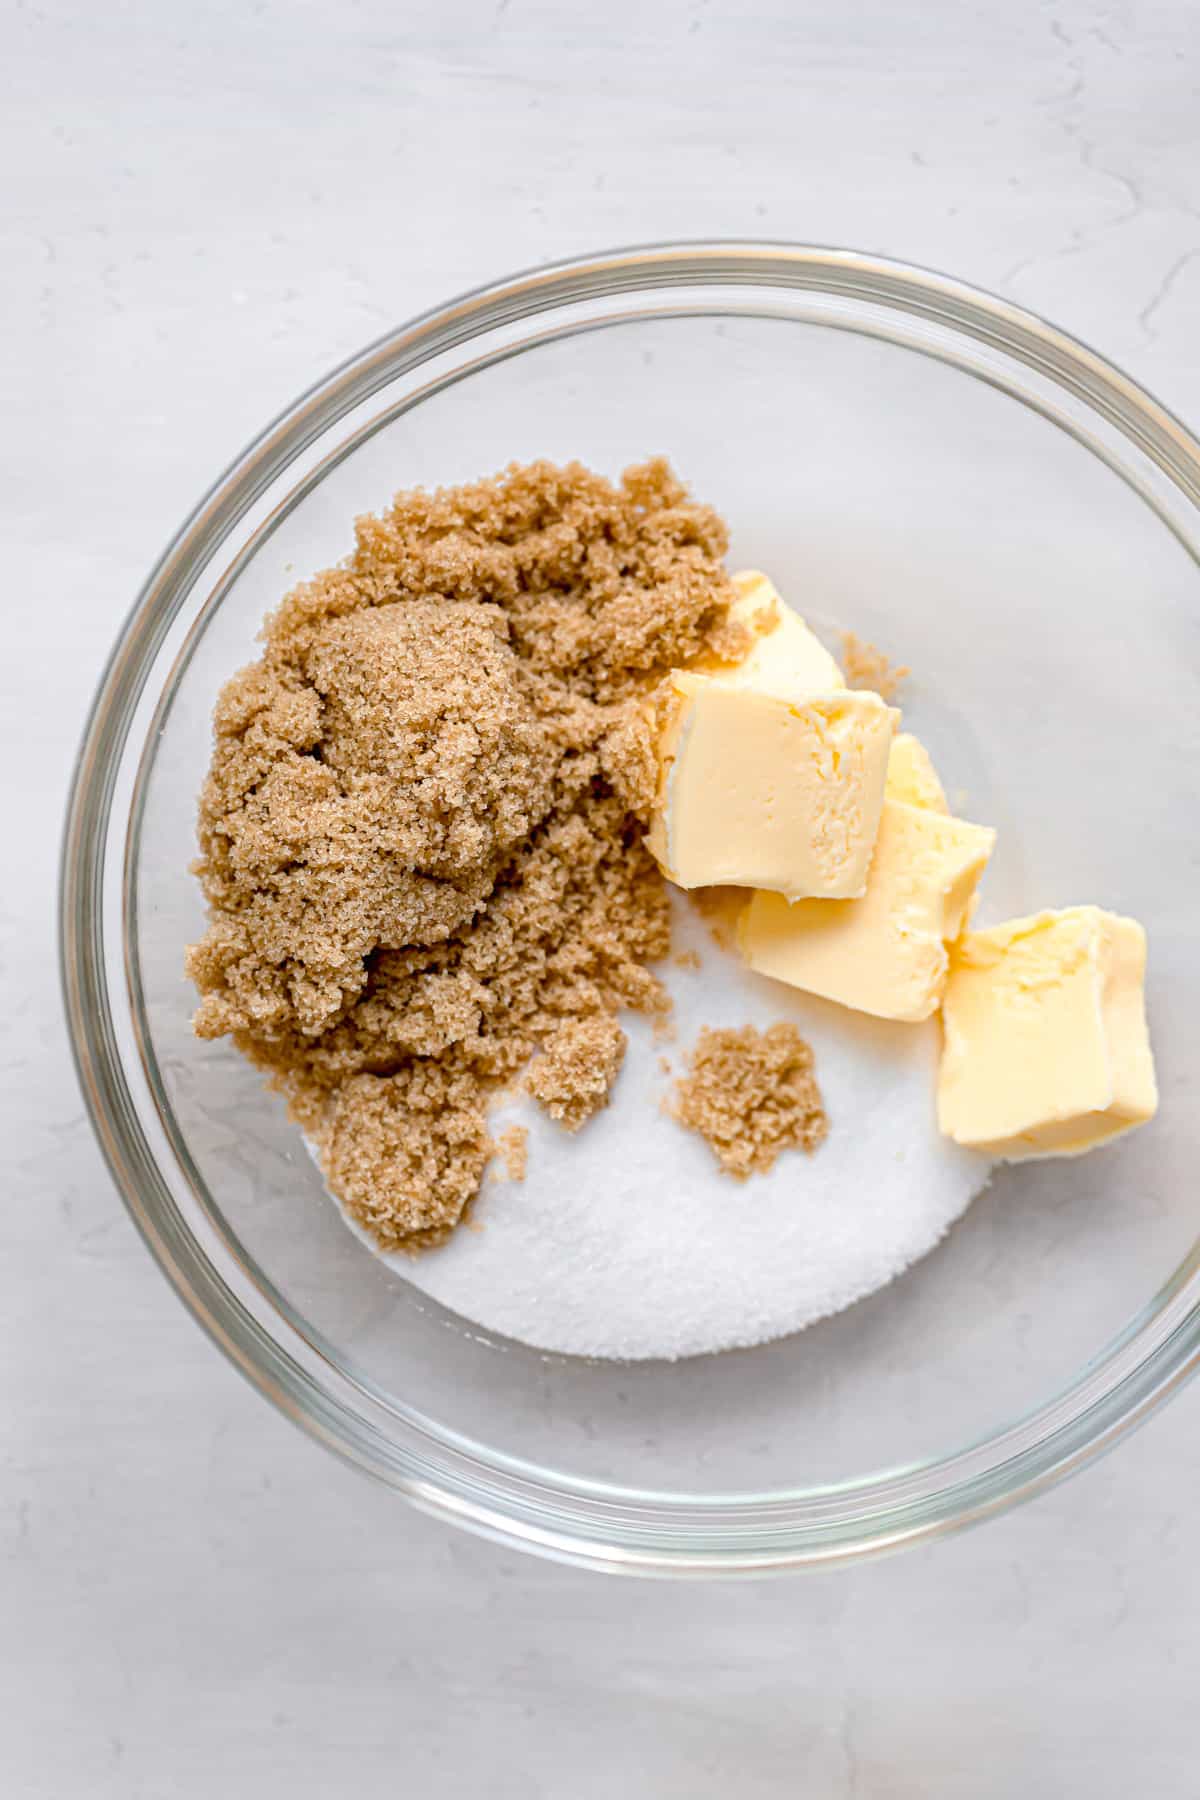 sugars and butter in glass bowl.